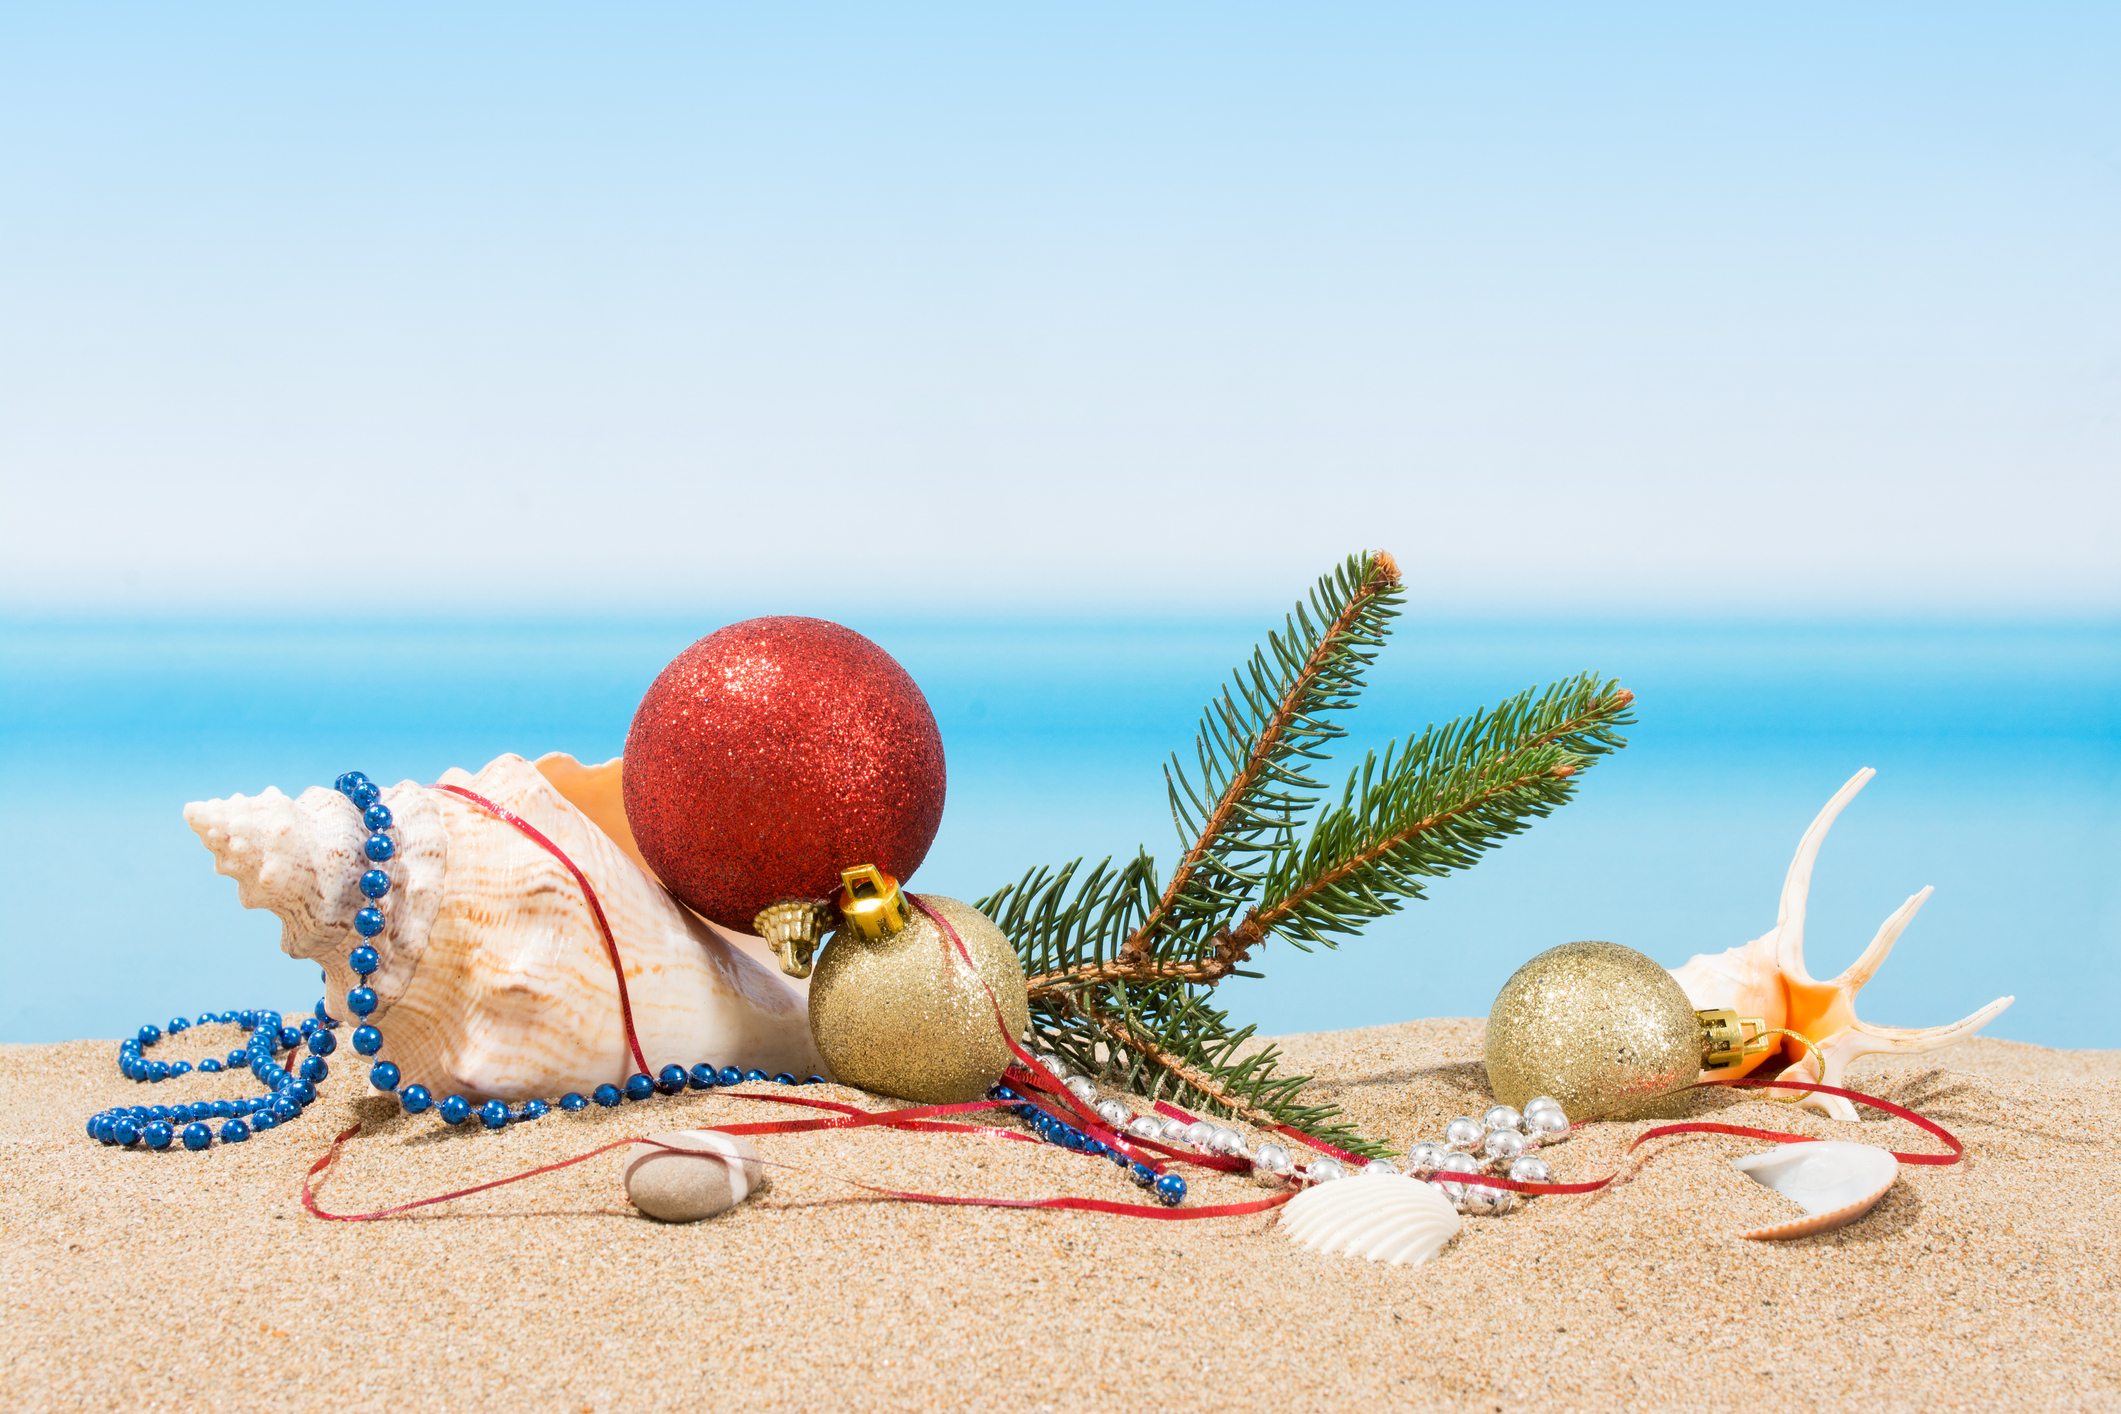 Top 10 Things to do in Myrtle Beach in December